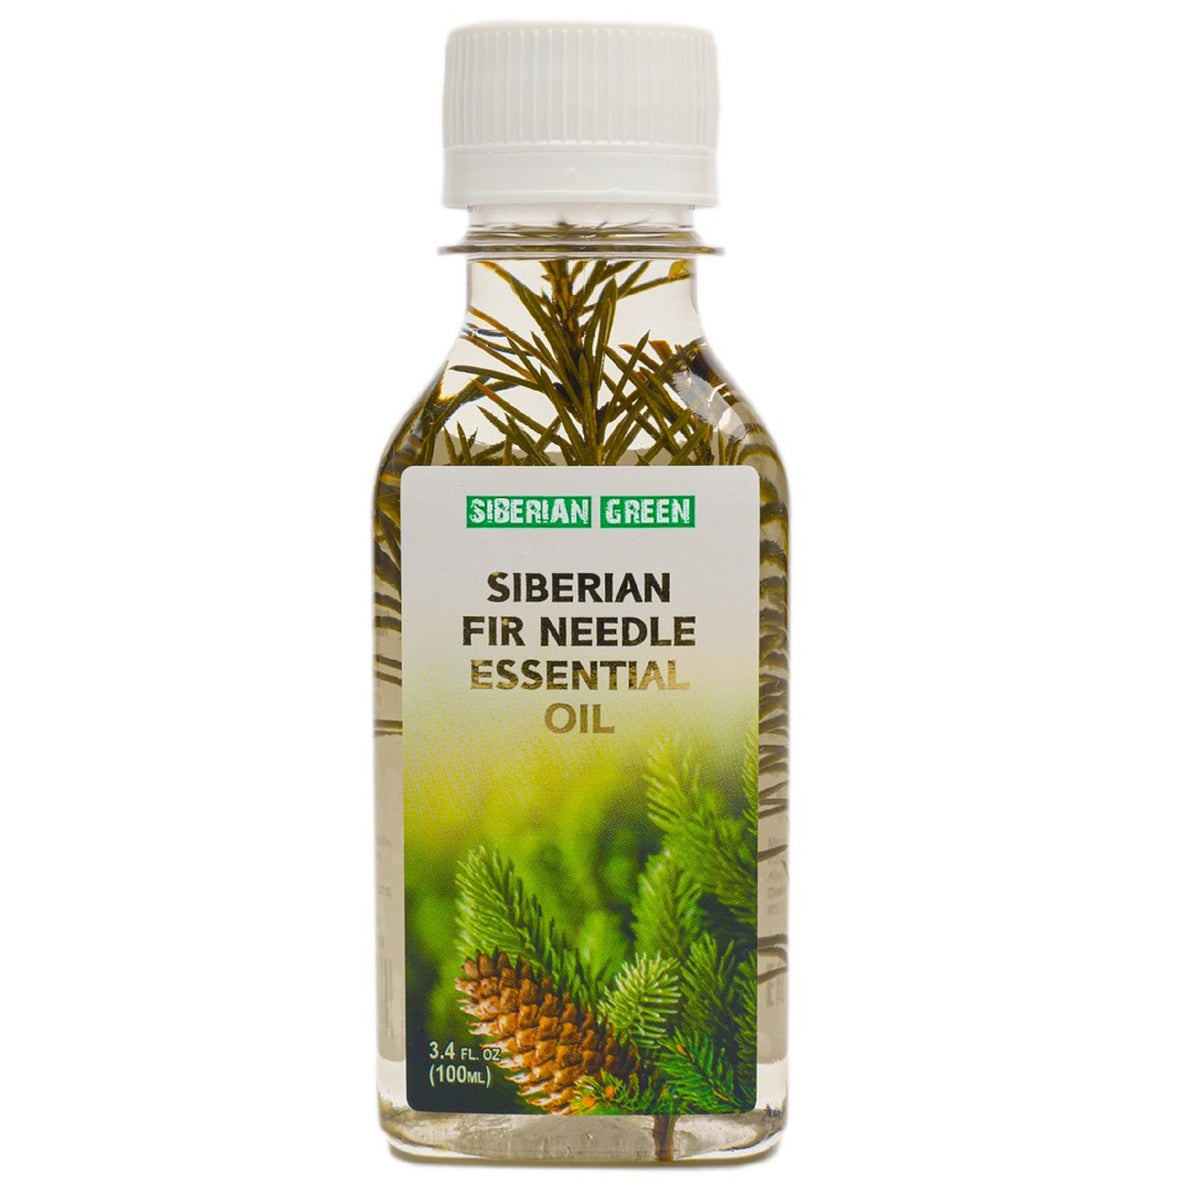 Siberian Green Fir Needle Essential Oil 3.4 oz - 100% Pure Finest Undiluted with Original Siberian Pine Branch Inside